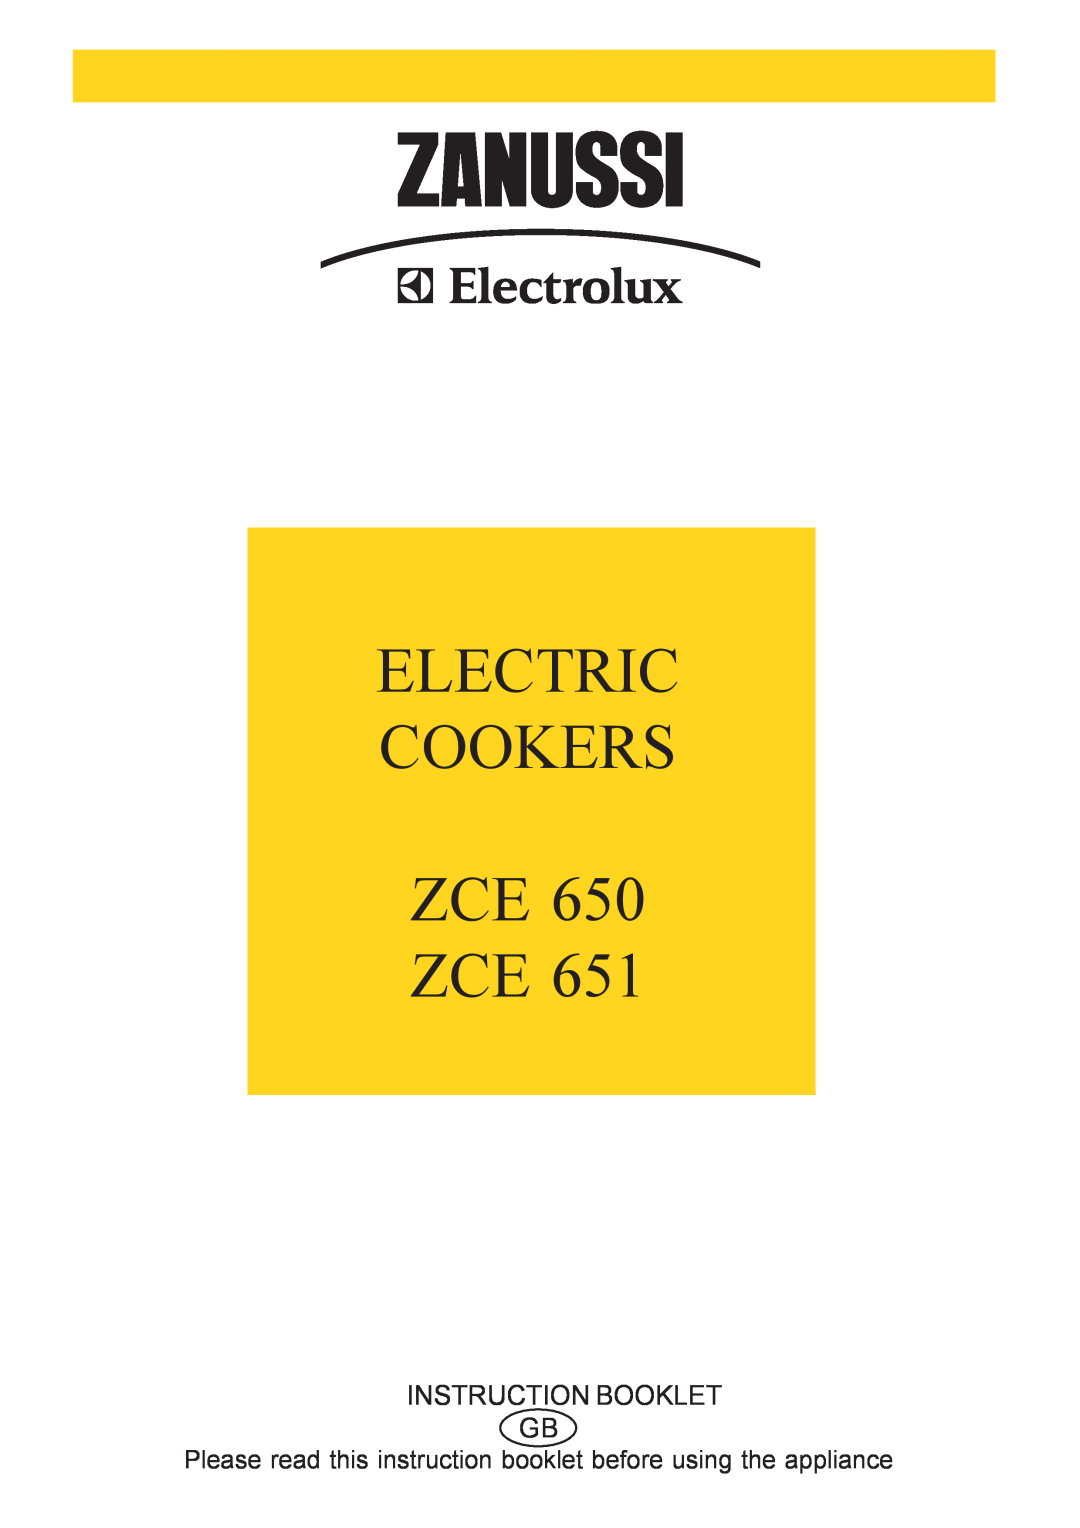 Zanussi ZCE 651, ZCE 650 manual Please read this instruction booklet before using the appliance, Electric Cookers Zce Zce 